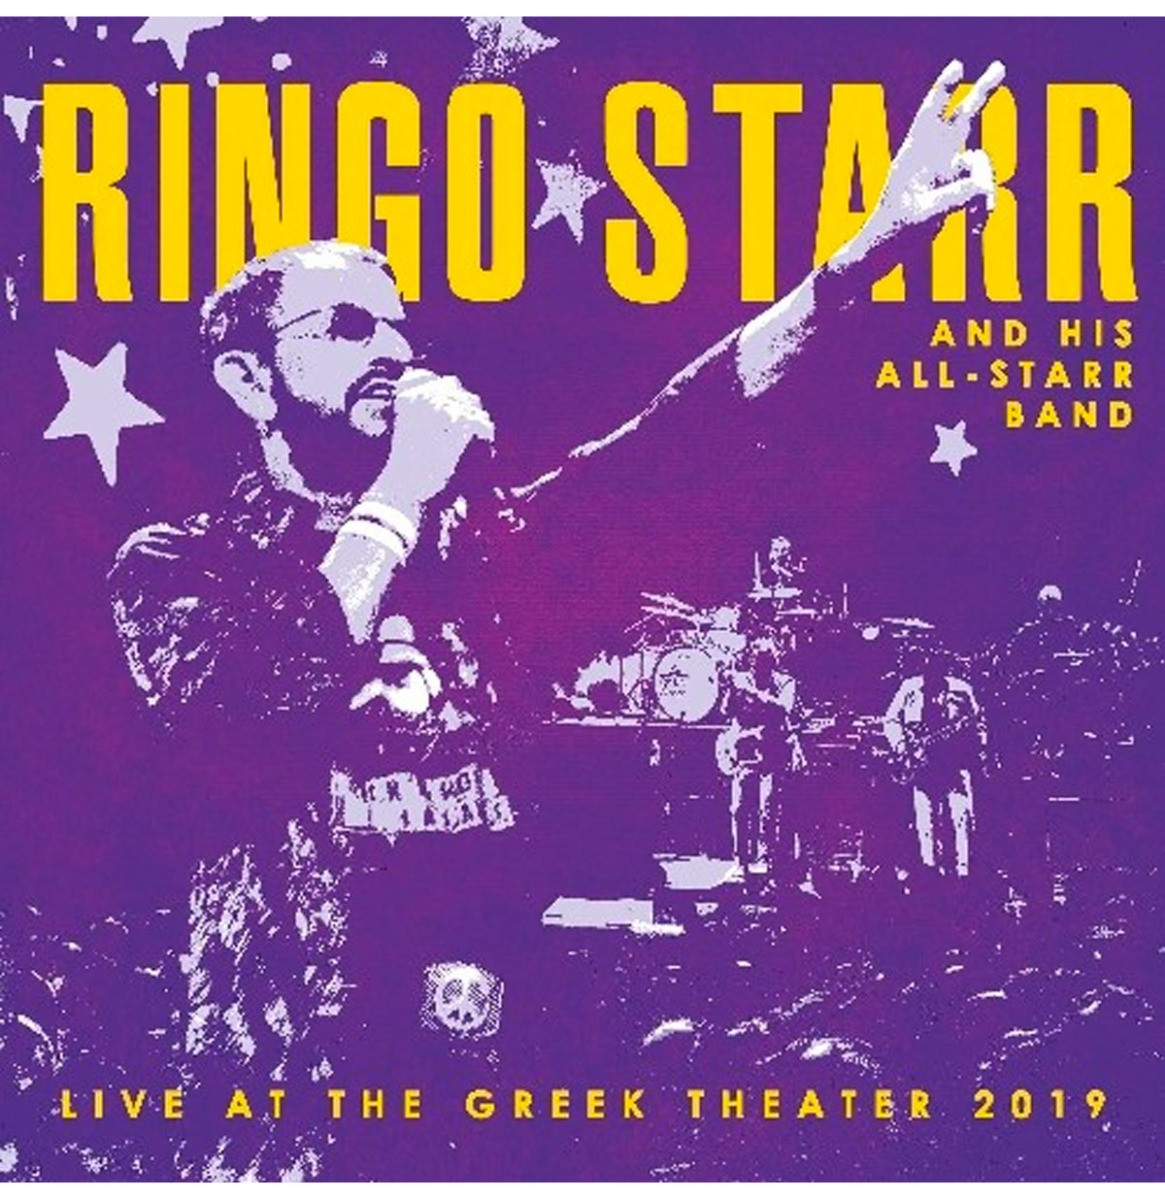 Ringo Starr & His All-Starr Band - Live At The Greek Theater 2019 (Gekleurd Vinyl) (Record Store Day Black Friday 2022) 2LP